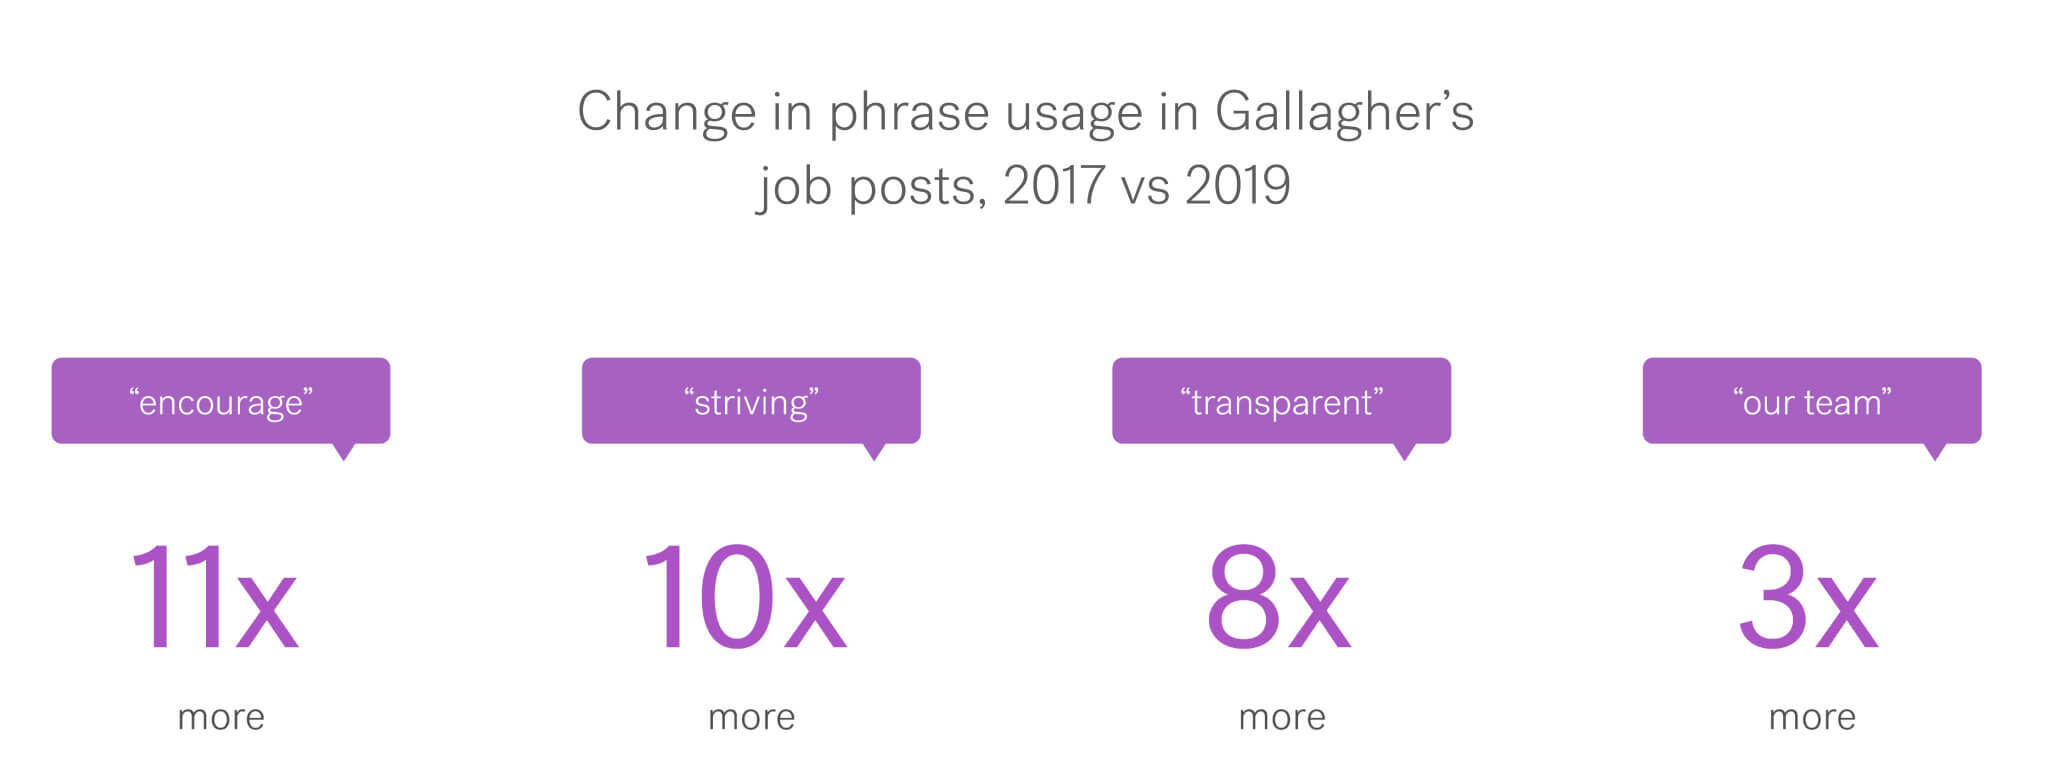 Visual showing 2017 vs. 2019 change in phrase usage in Gallagher's job posts, shows increases in phrases "encourage," "striving," "transparent," and "our team."